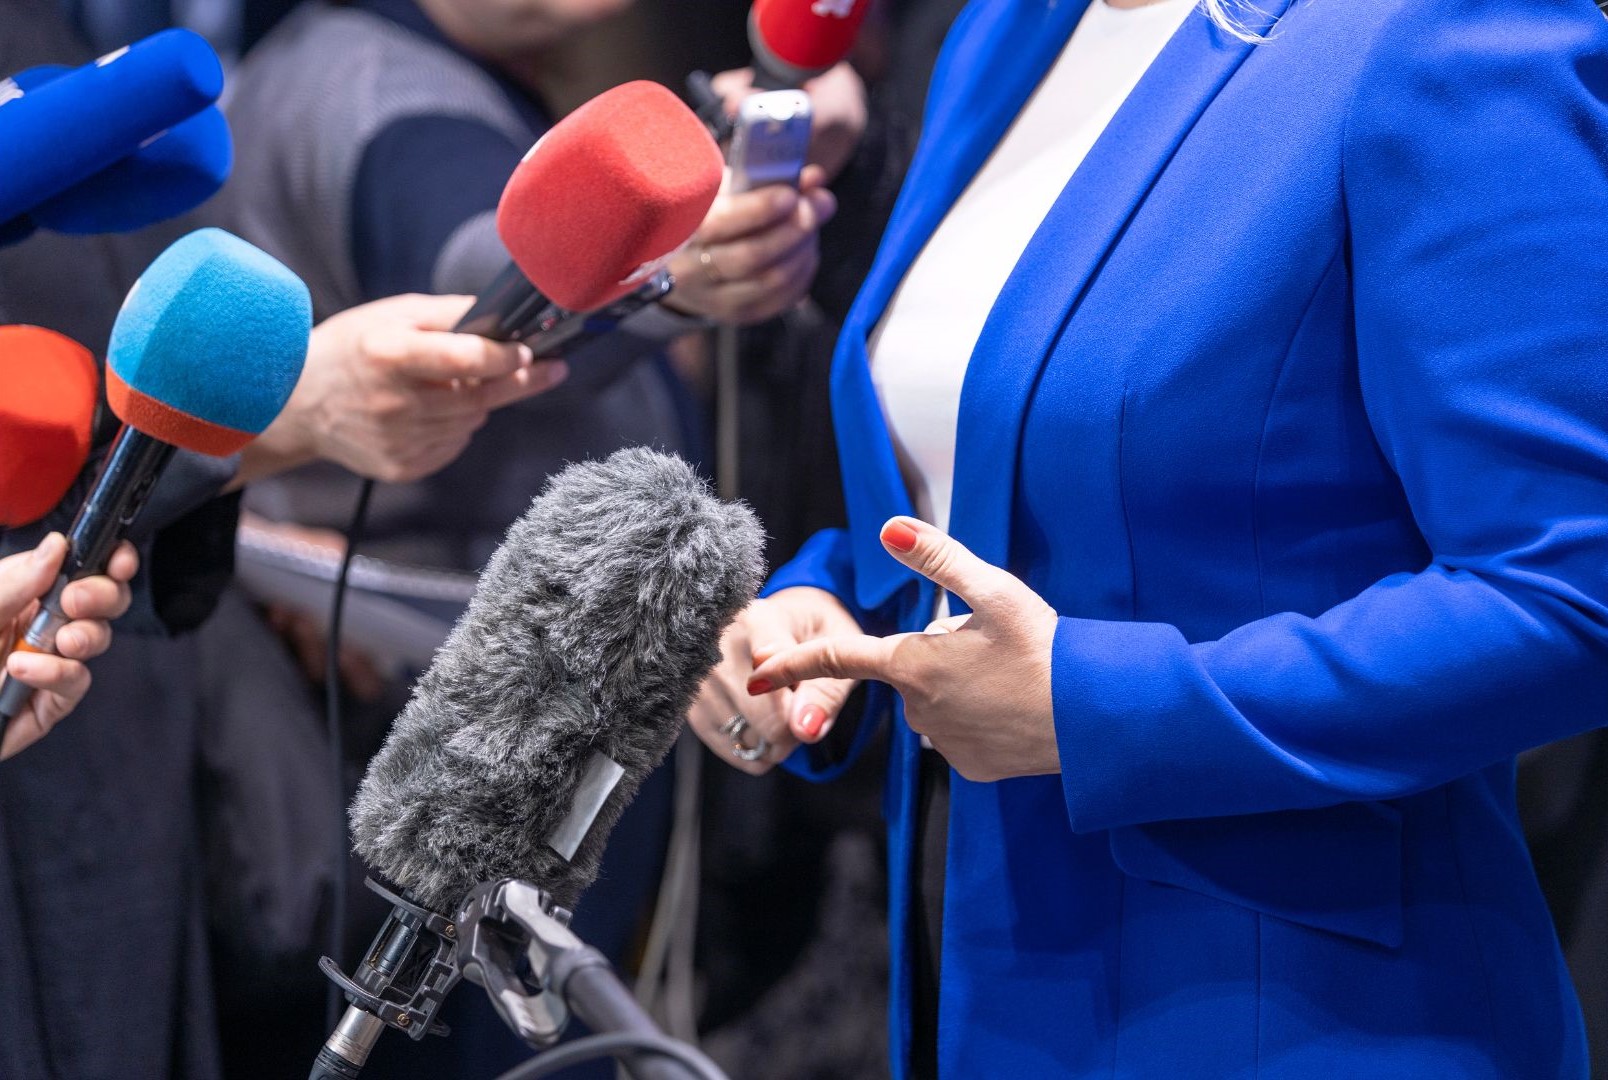 Woman giving a press conference